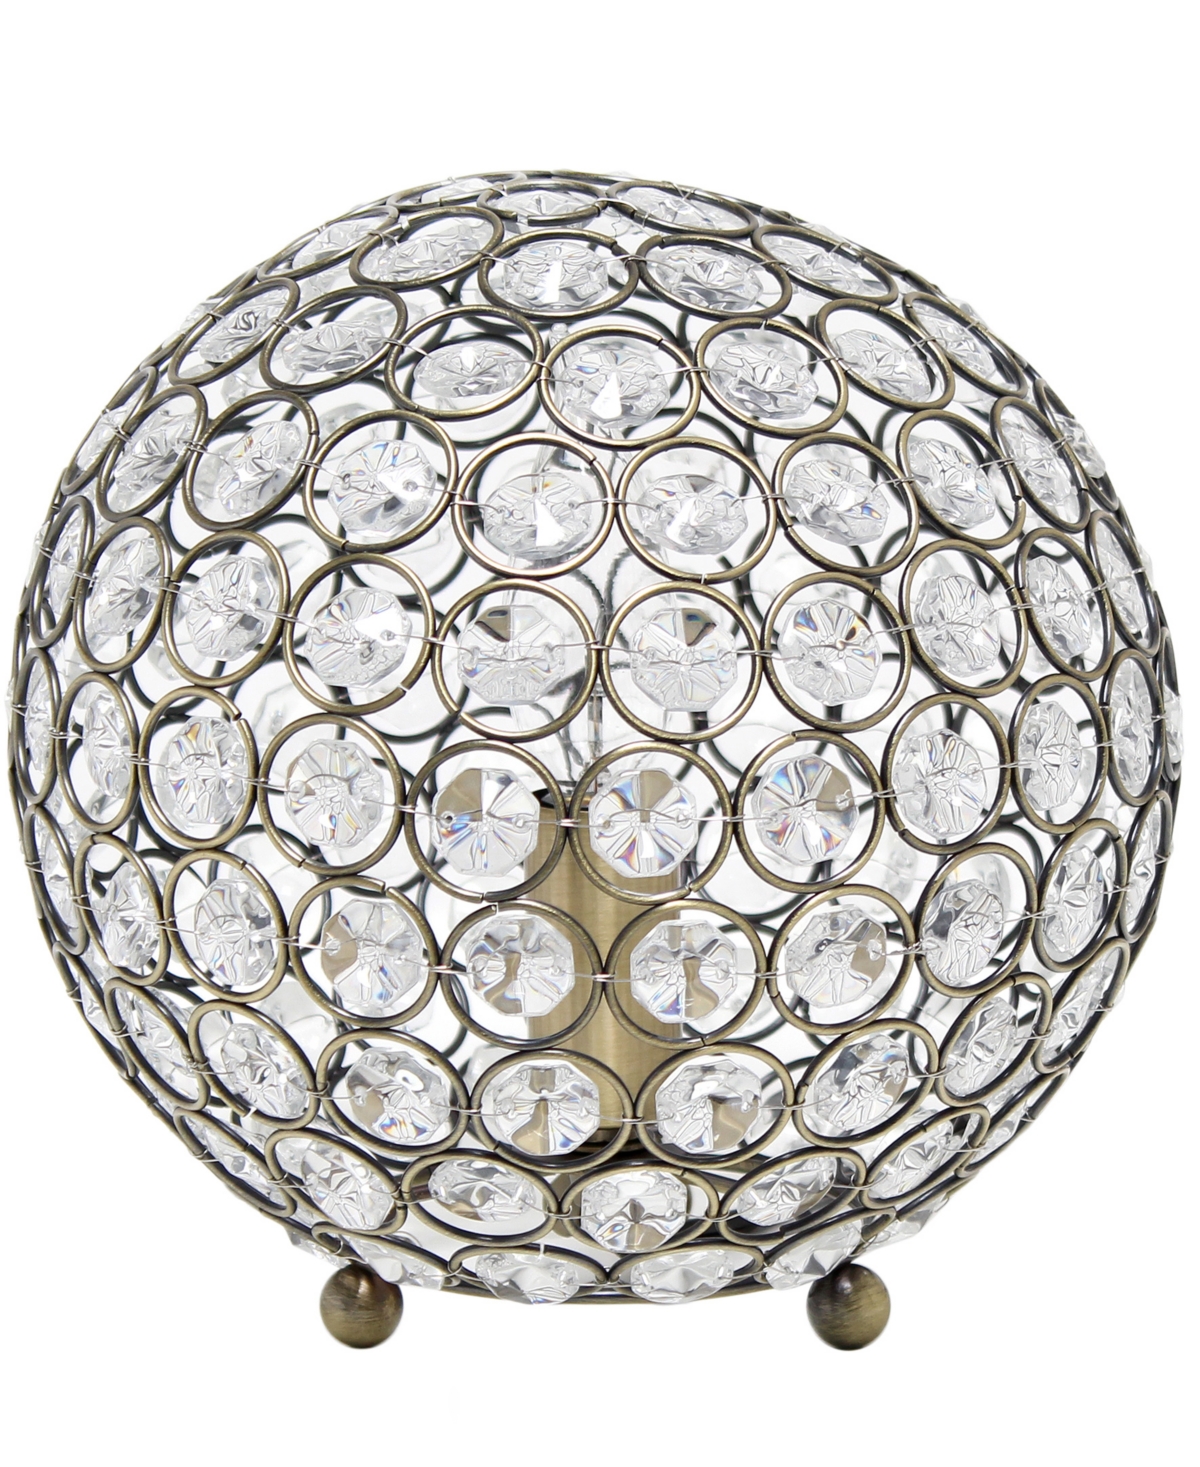 Shop Lalia Home 8" Elipse Medium Contemporary Metal Crystal Round Sphere Glamorous Orb Table Lamp In Antique Brass